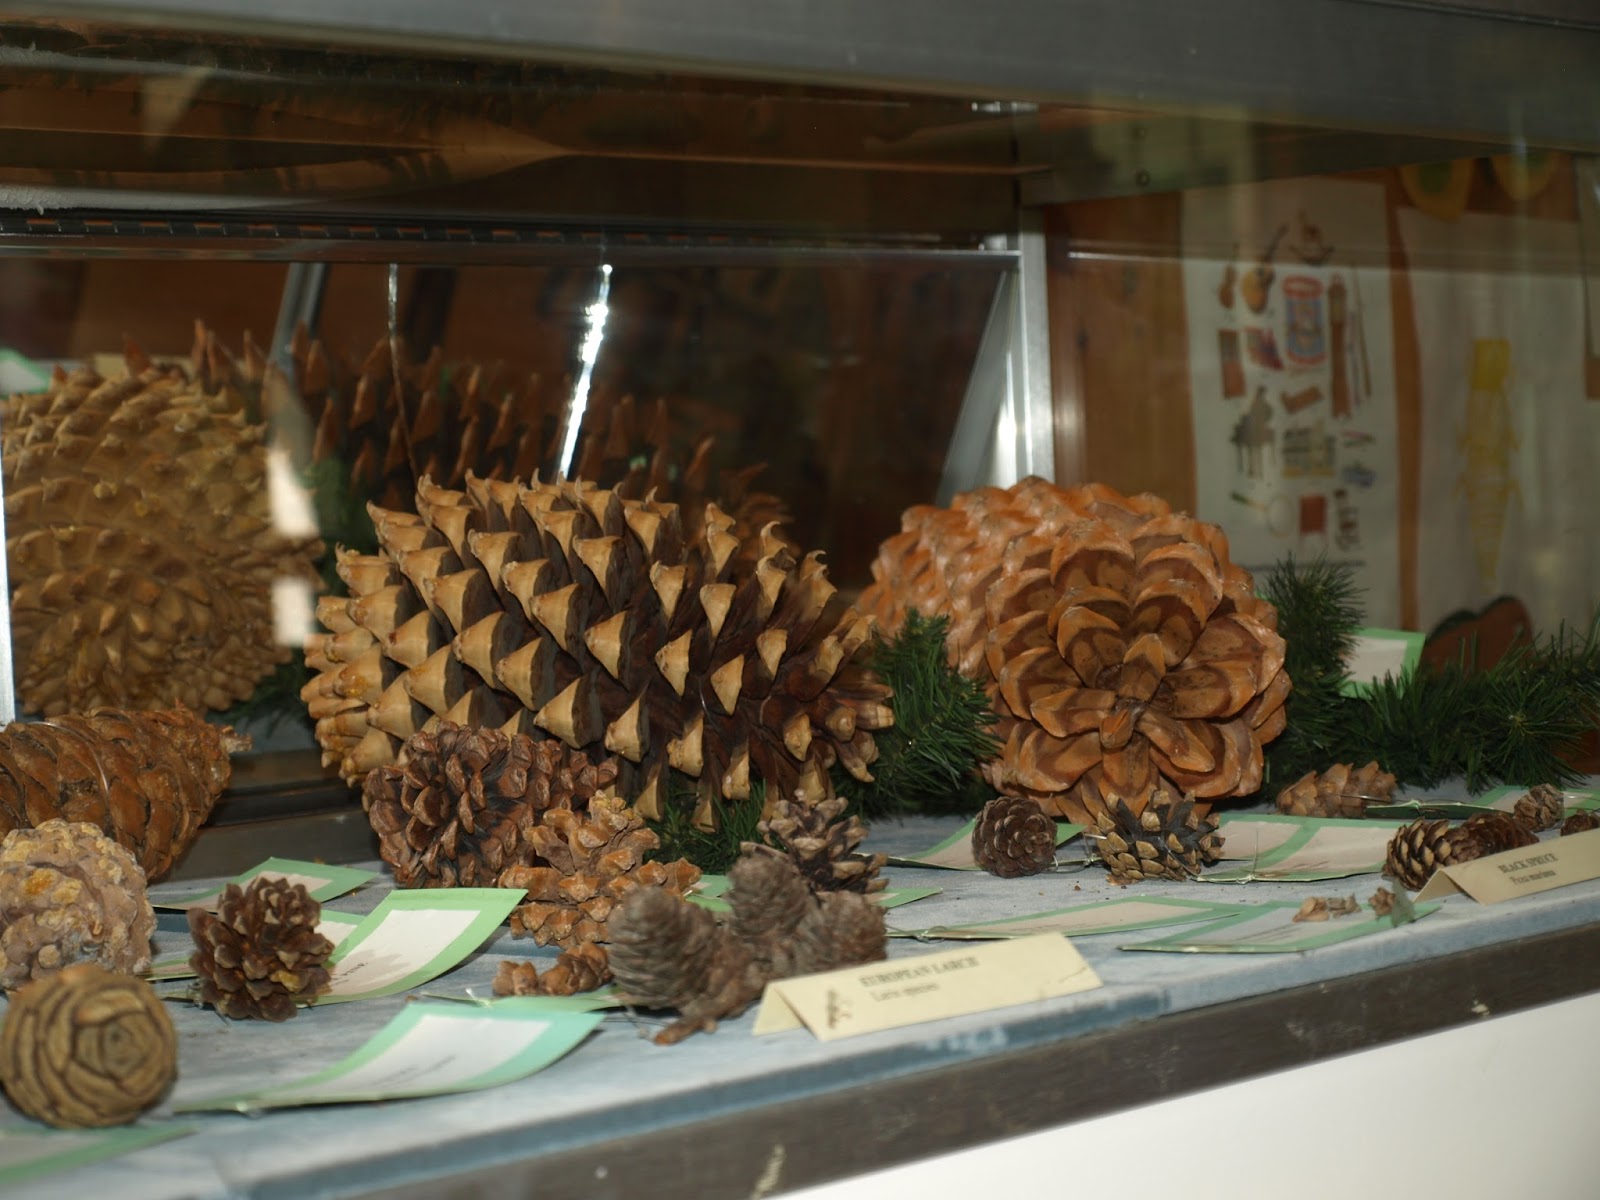 Why Are There So Many Pine Cones This Year?